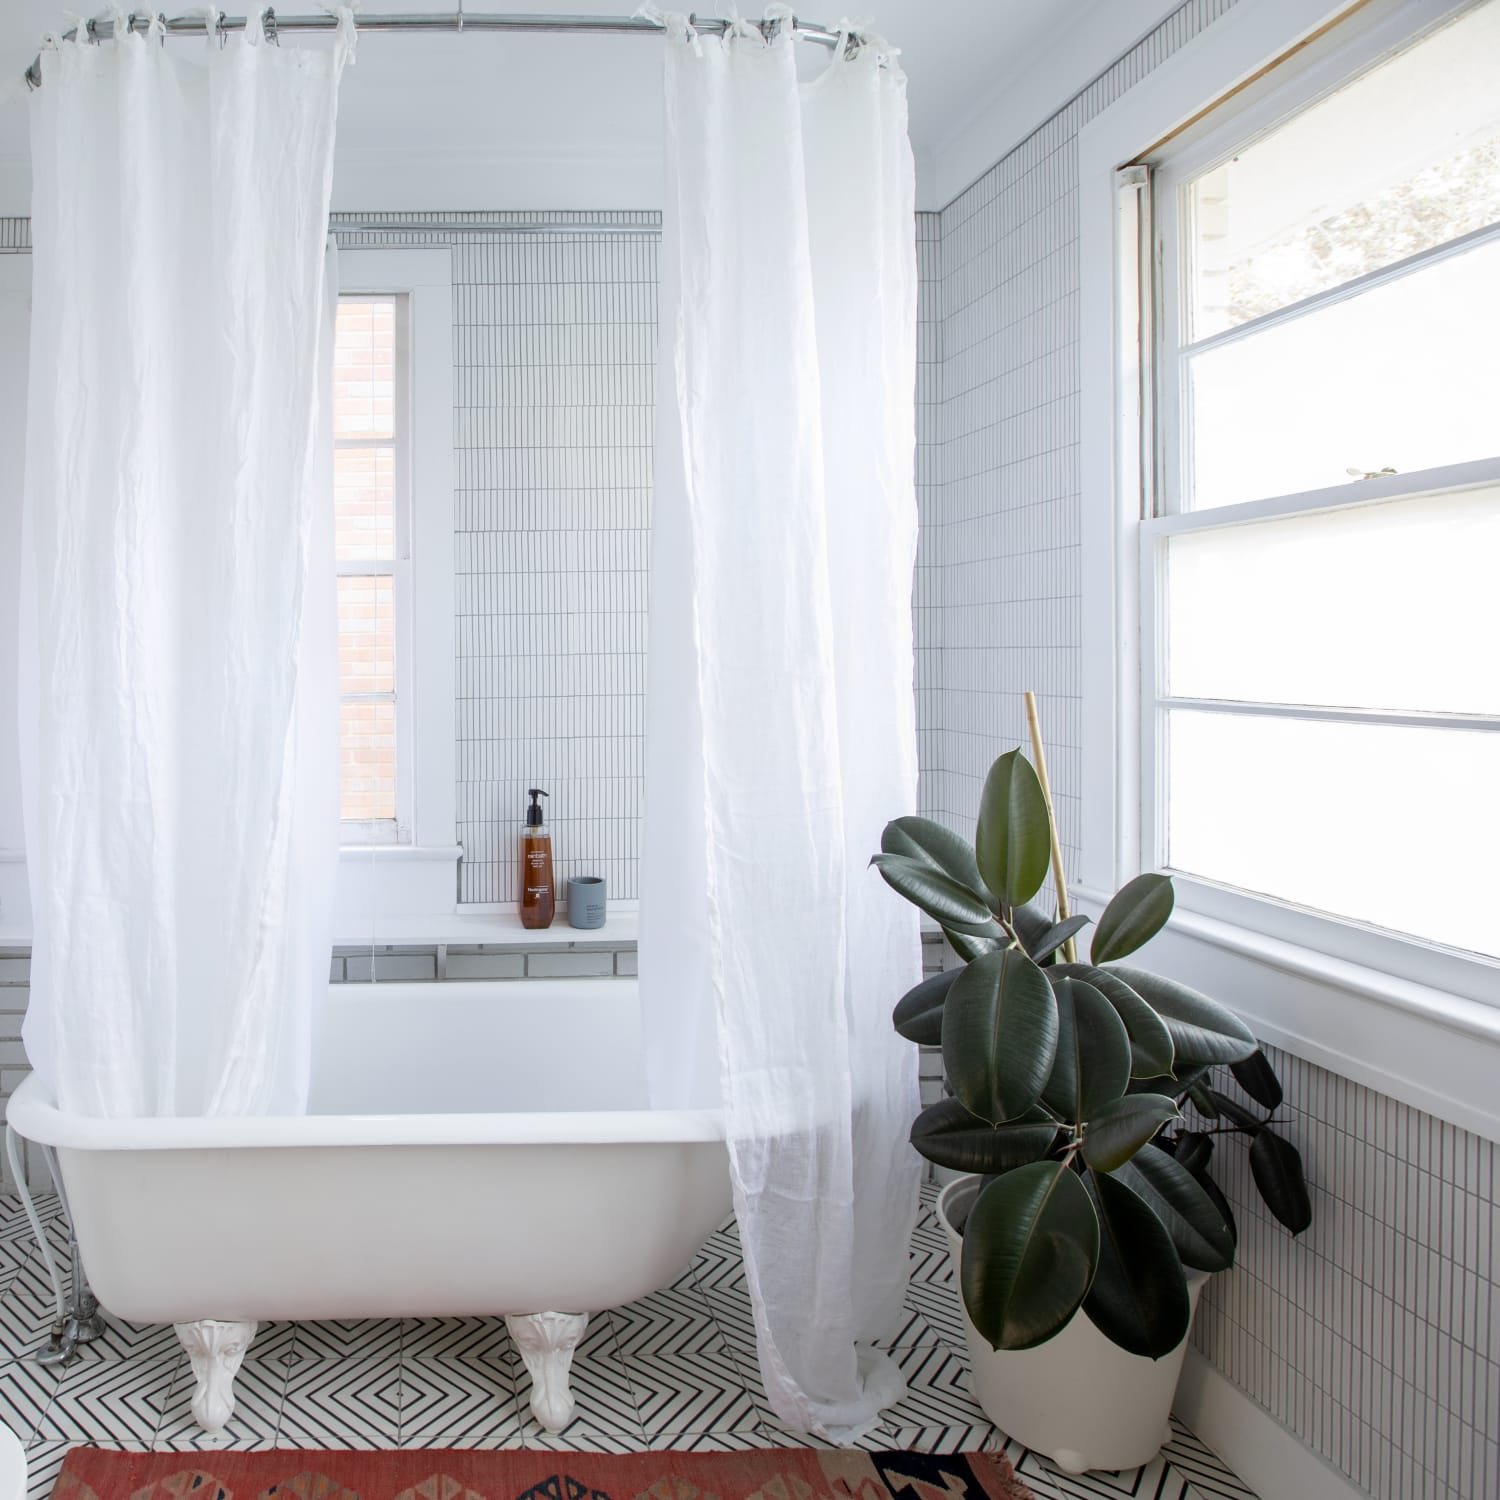 Elizabeth Partida Realtor - Small bathroom? Hang your curtain high! Cloth shower  curtains introduce a level of sophistication and glamour to any bathroom.  Use this to your advantage in a small space